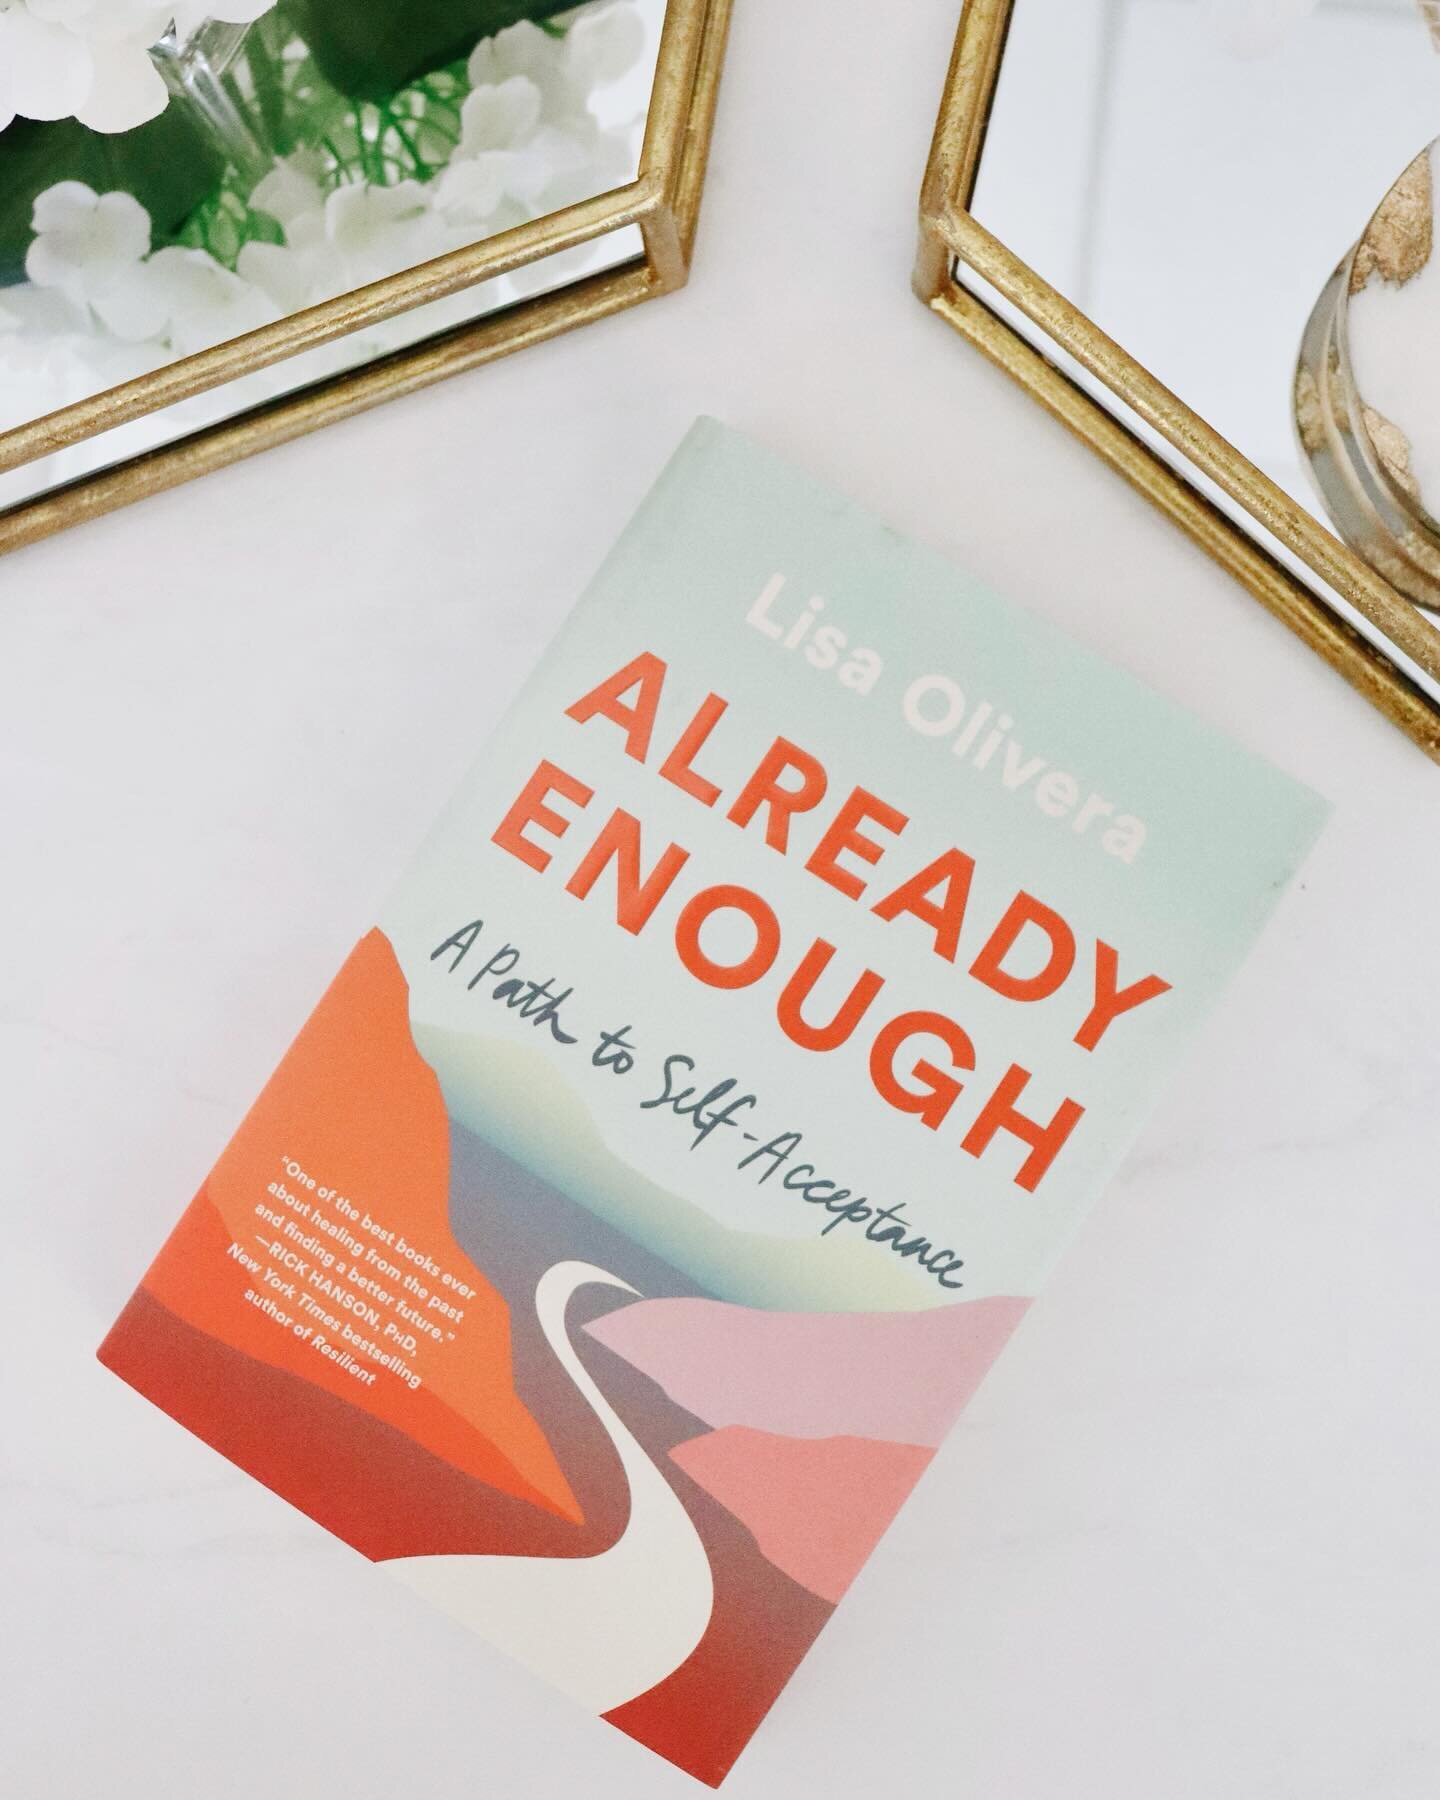 What we are reading here at The Path:⁣
⁣
📚 &ldquo;Already Enough: A Path to Self-Acceptance&rdquo; by Lisa Olivera⁣
⁣
This is a breathtaking book, from a truly inspirational human. ⁣
⁣
Lisa Olivera shares her personal journey to the path of self acc